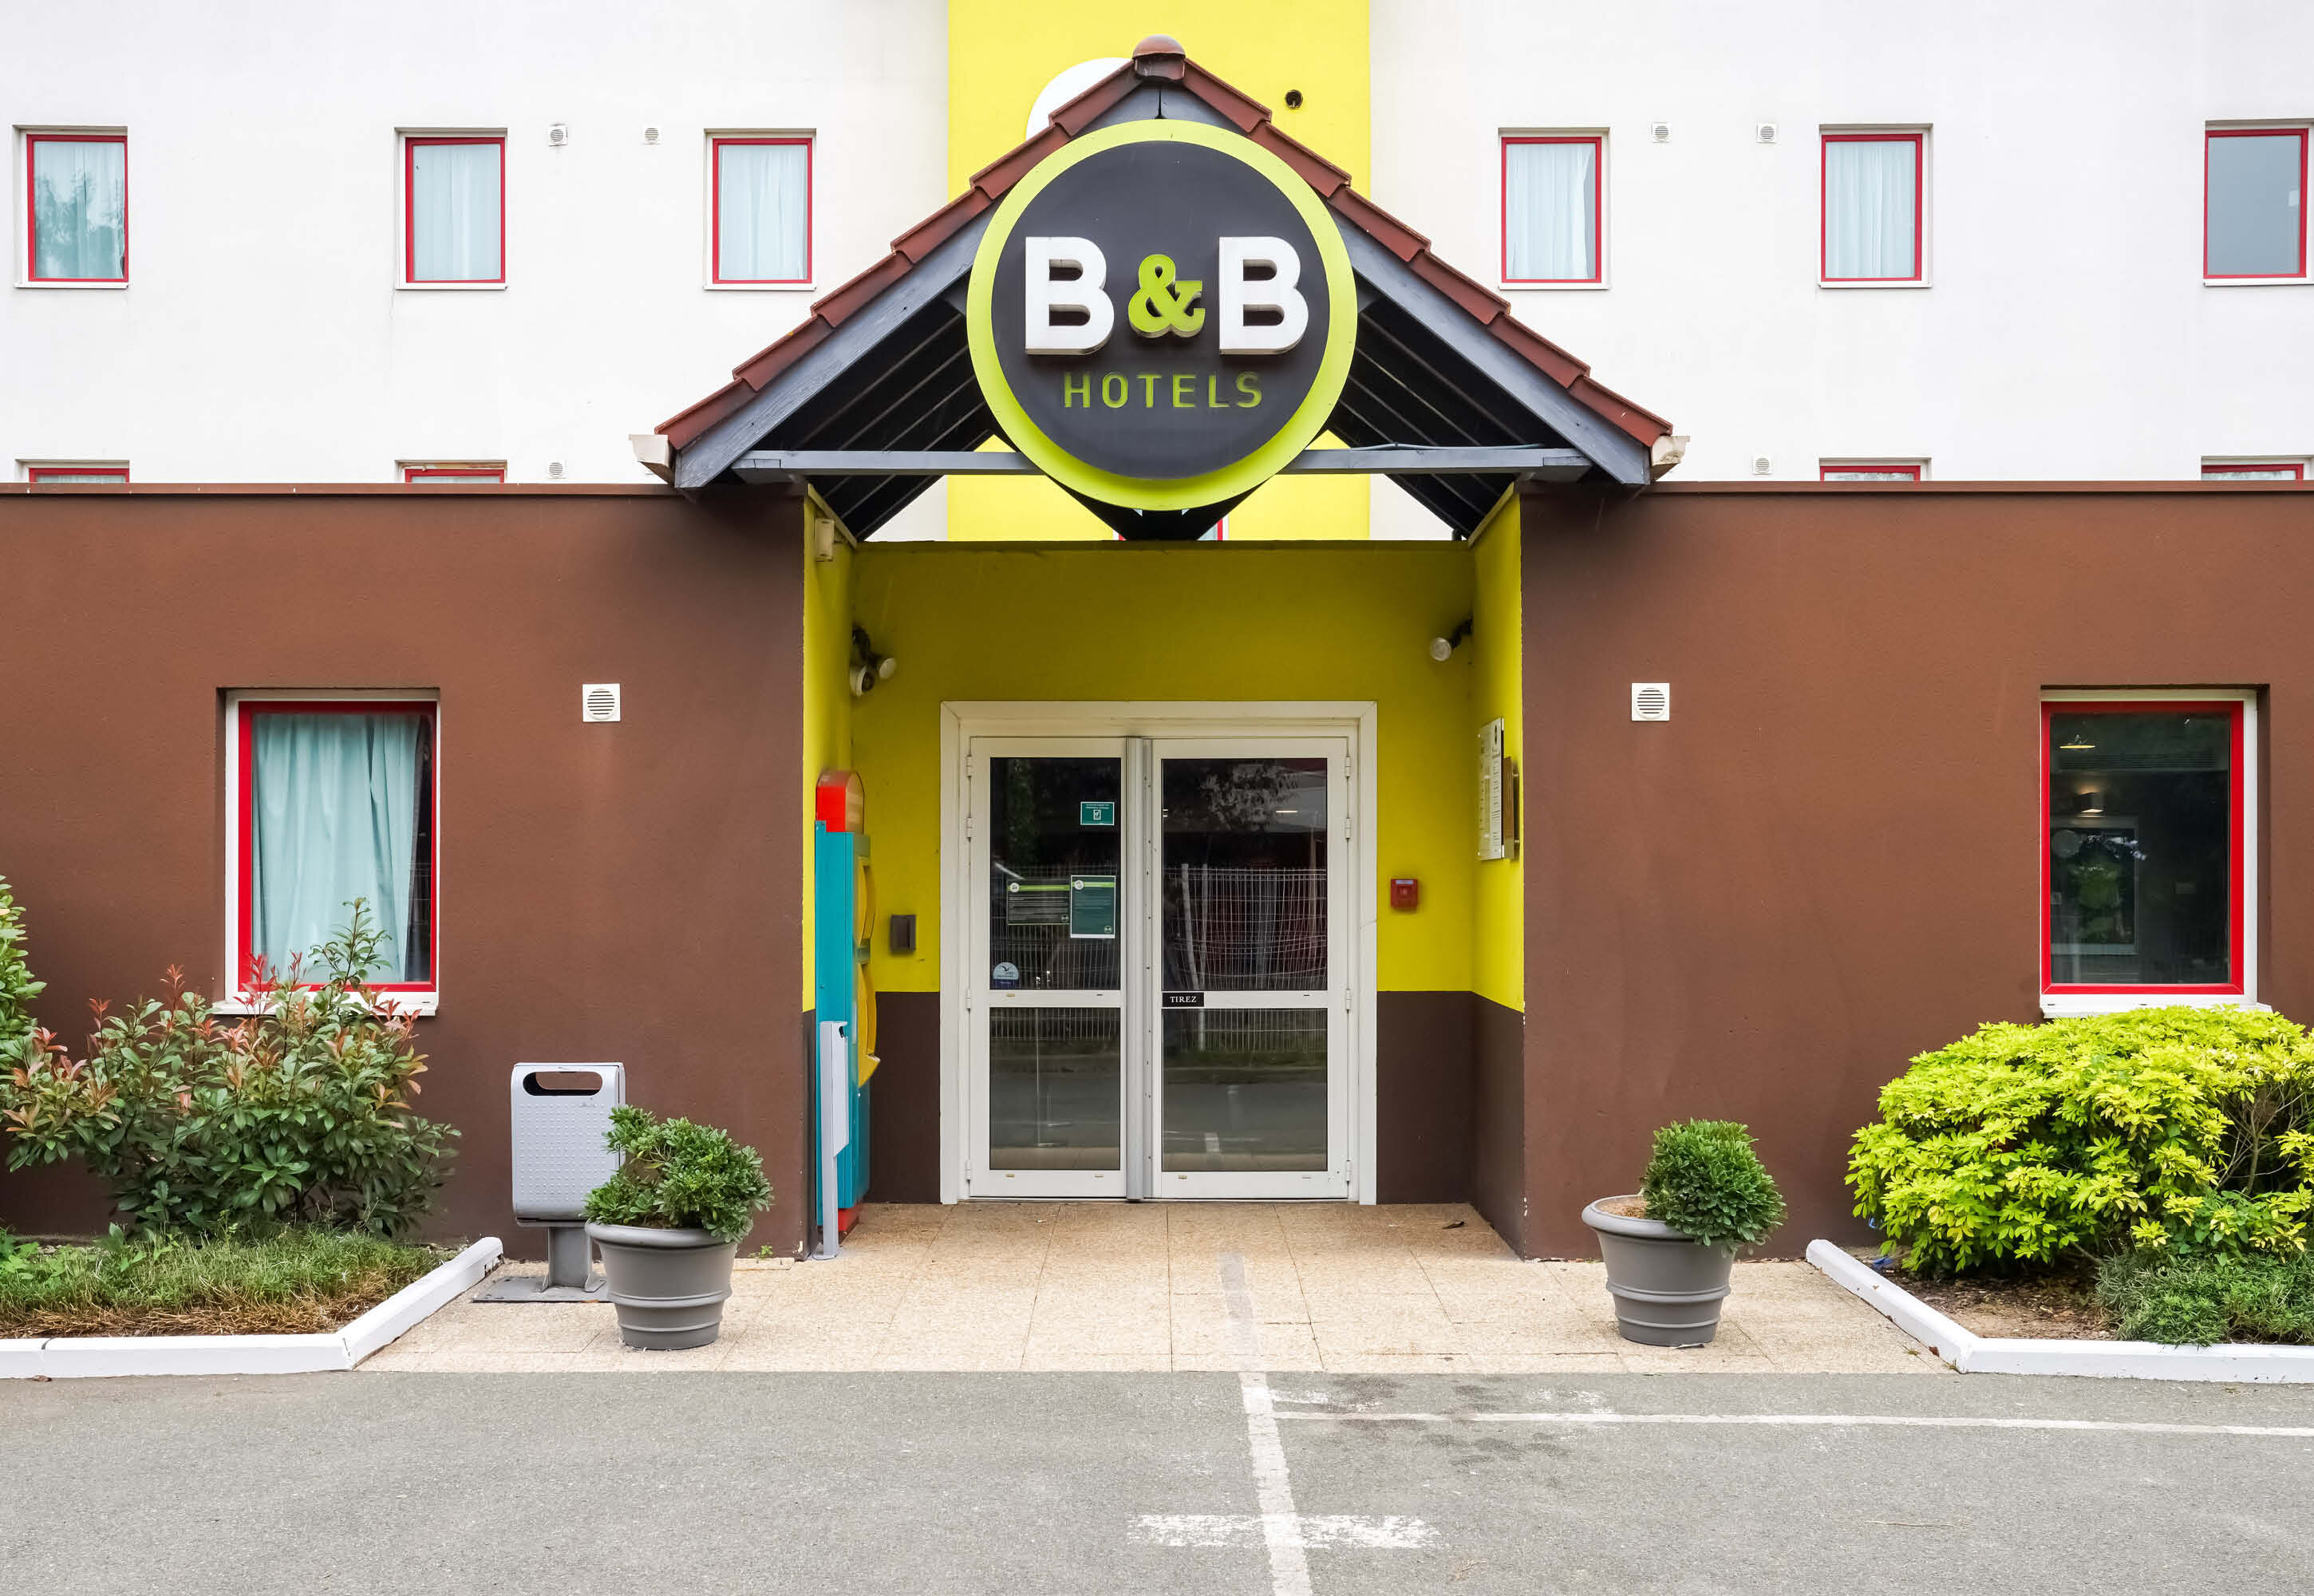 Images B&B HOTEL Goussainville CDG